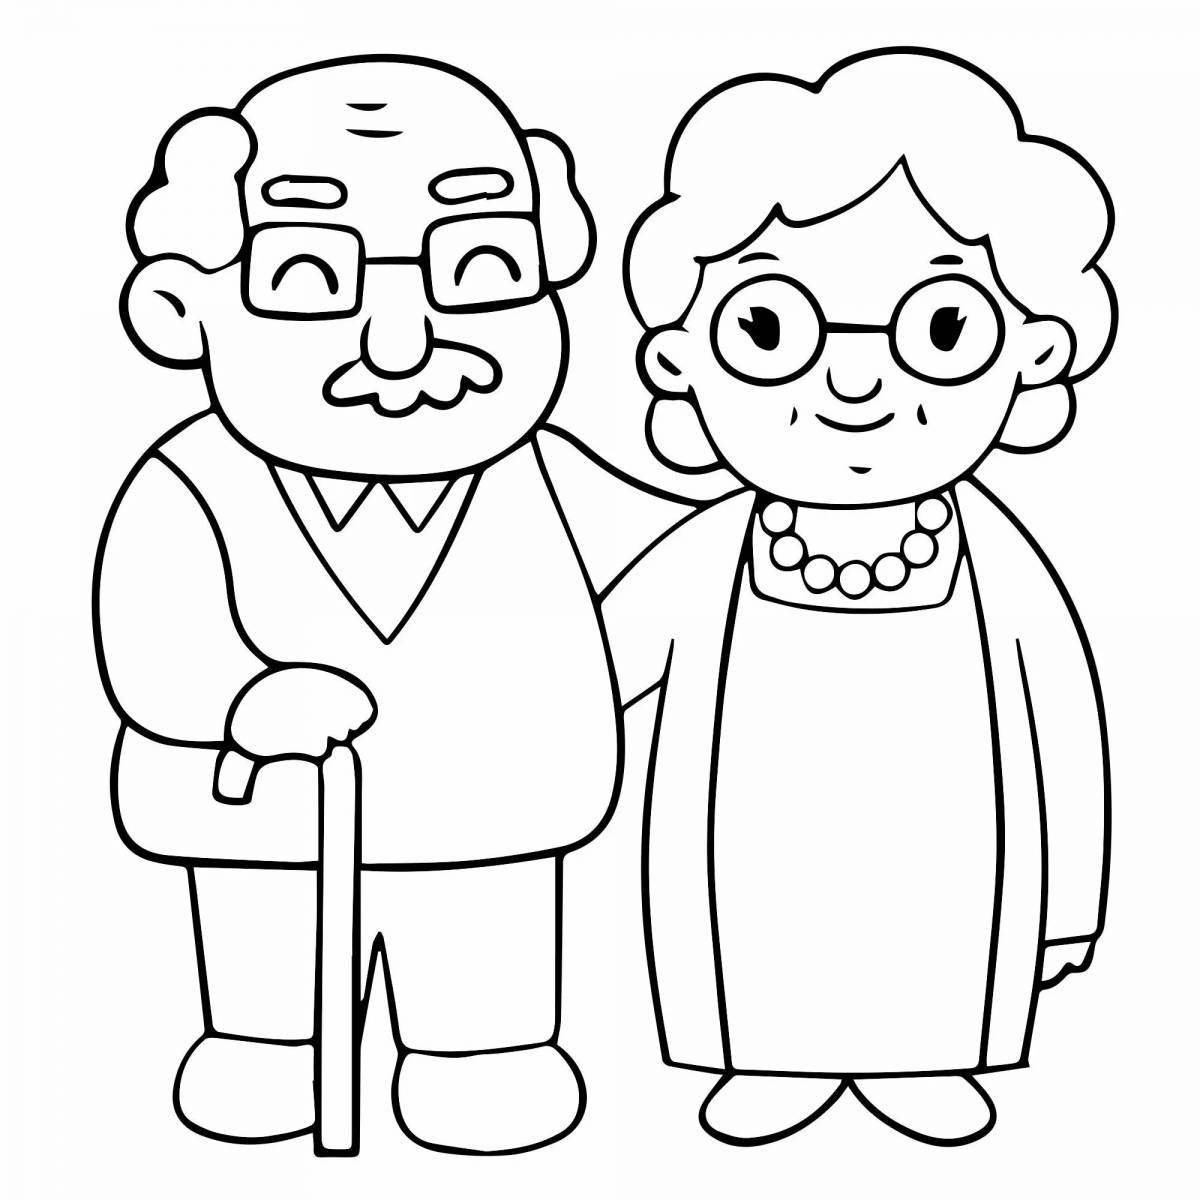 Coloring book peaceful grandfather and granddaughter